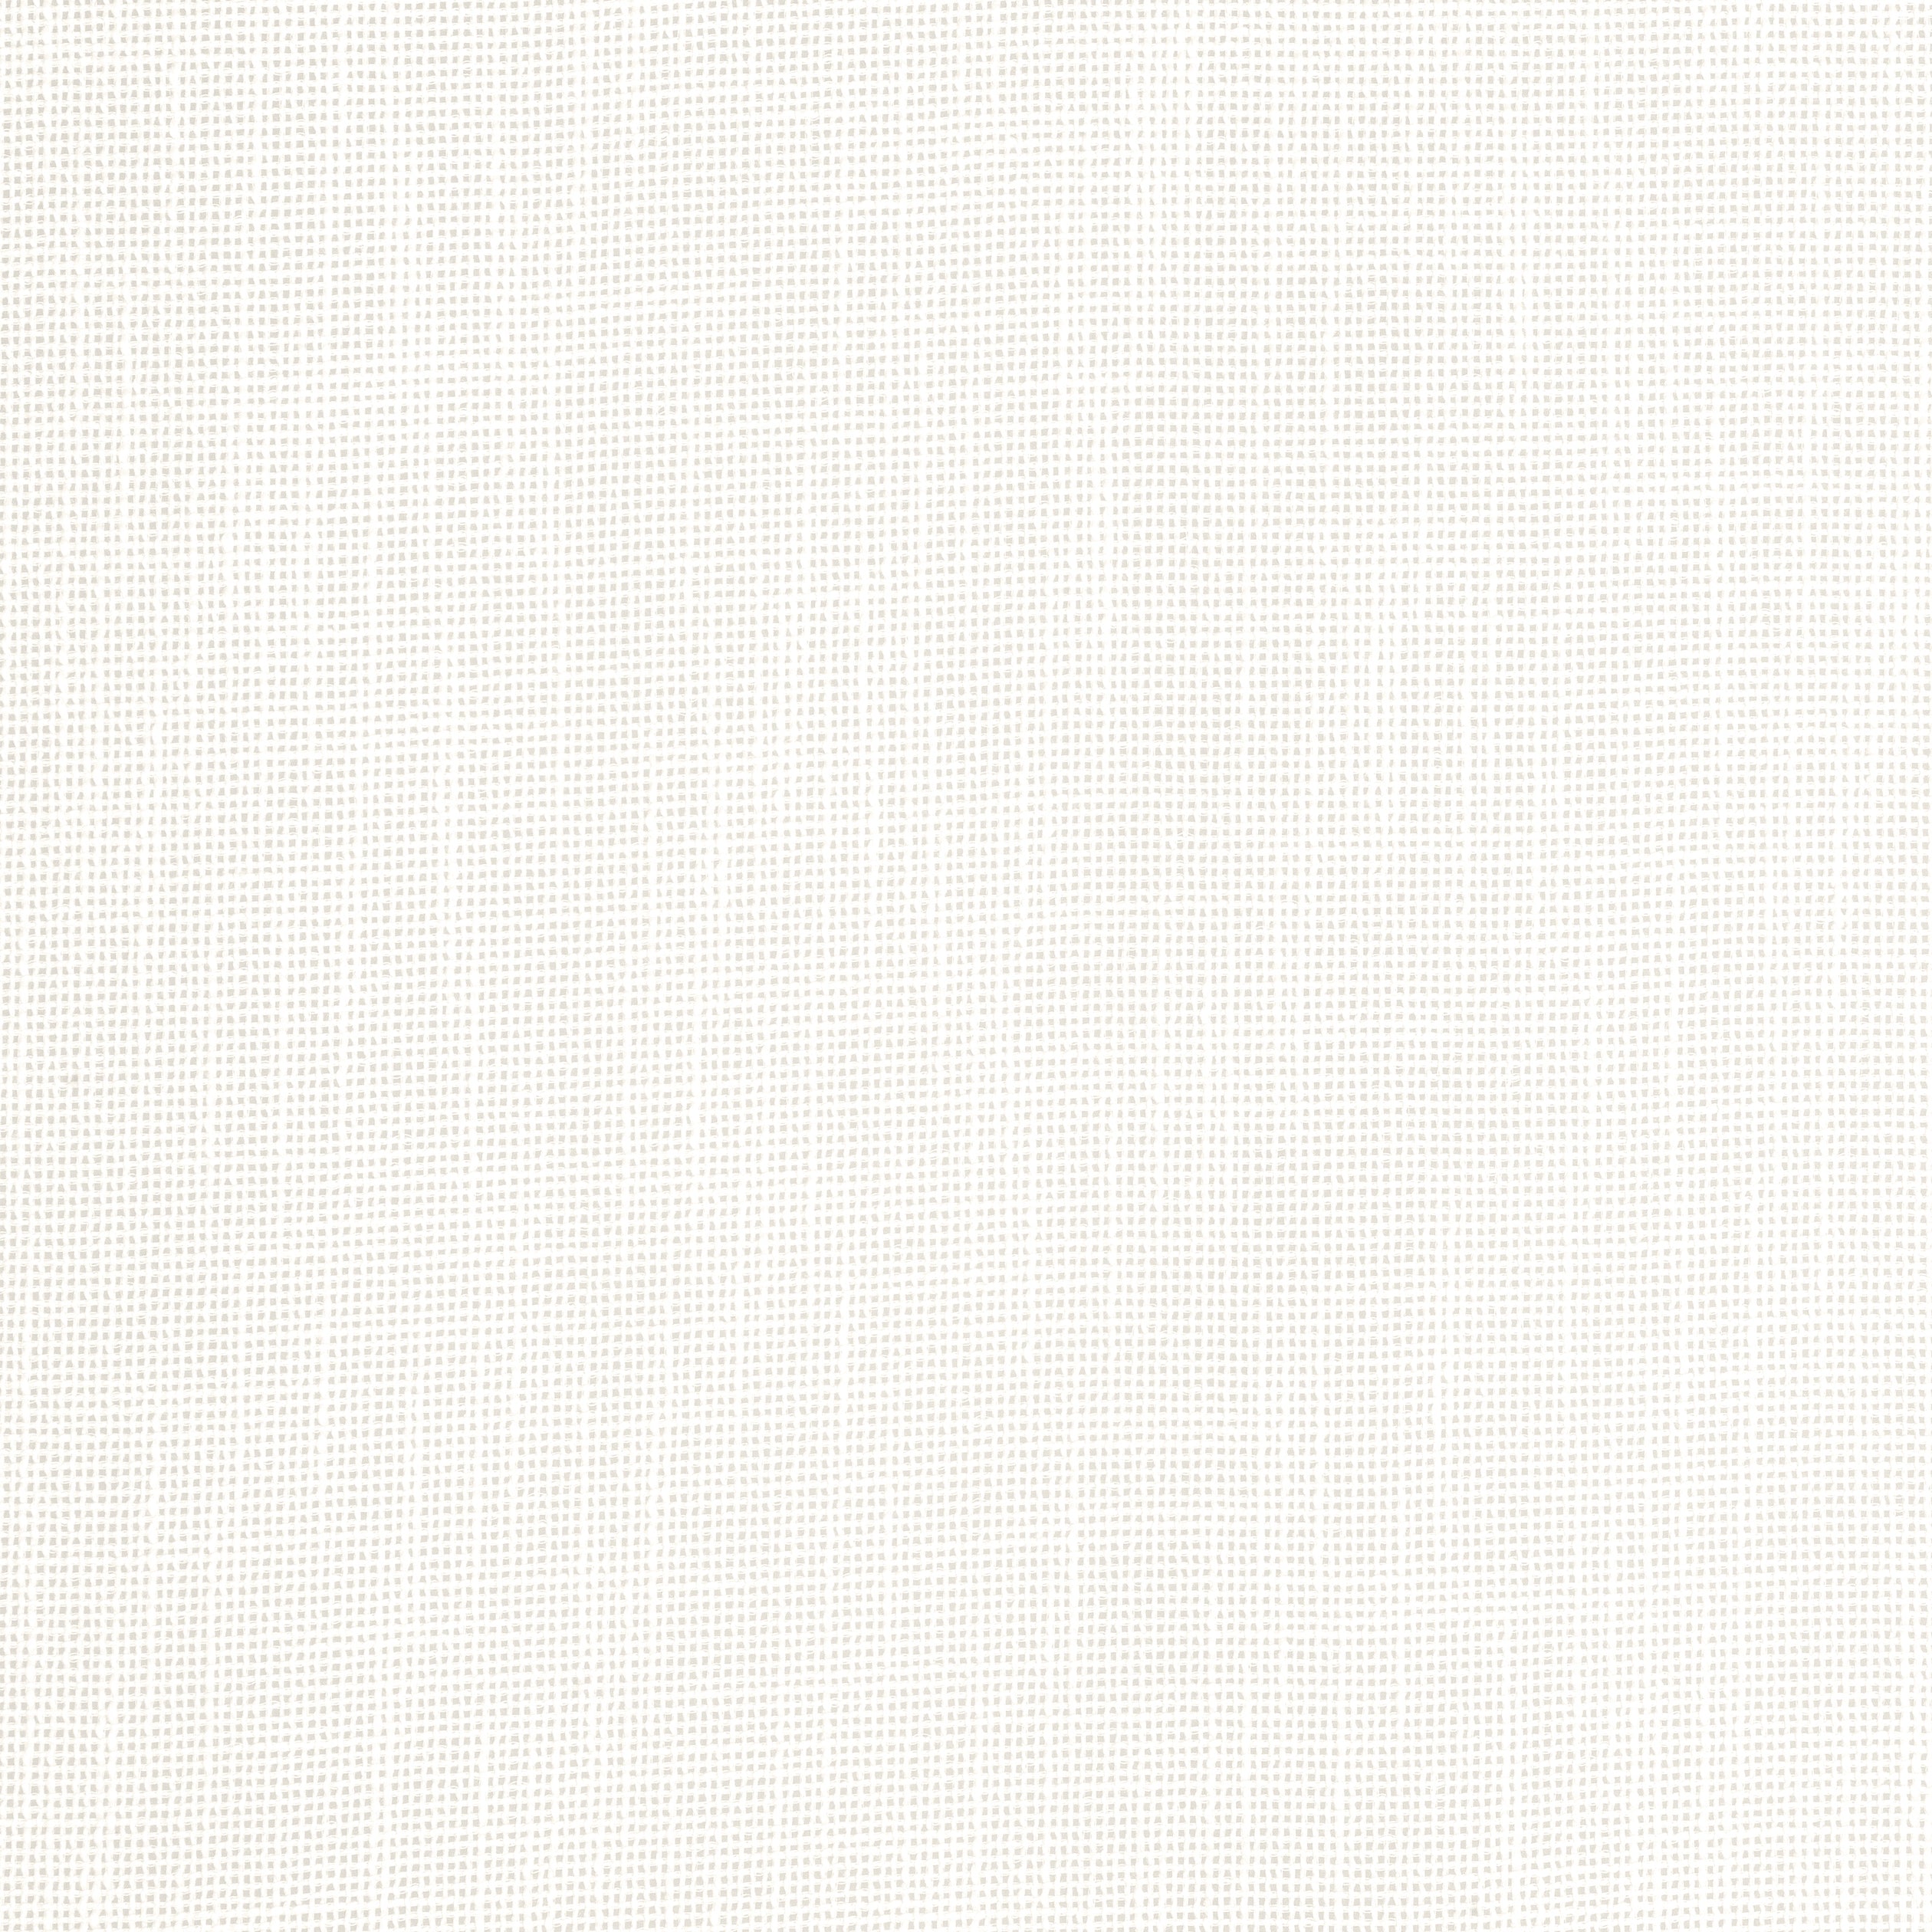 Mistral fabric in ivory color - pattern number FWW8226 - by Thibaut in the Aura collection